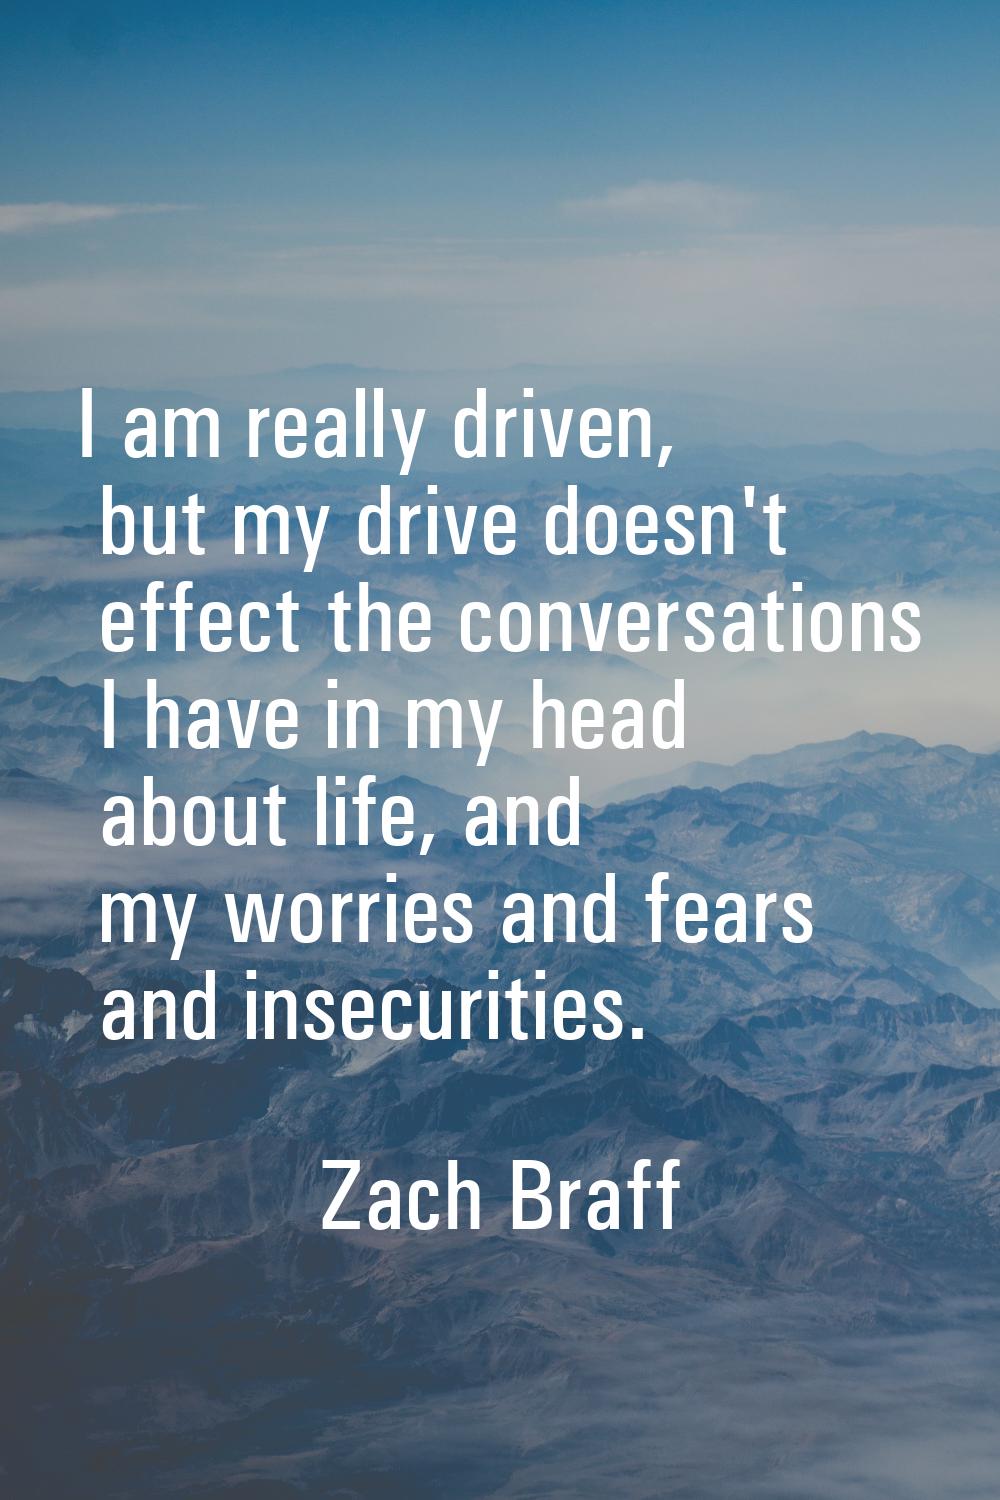 I am really driven, but my drive doesn't effect the conversations I have in my head about life, and